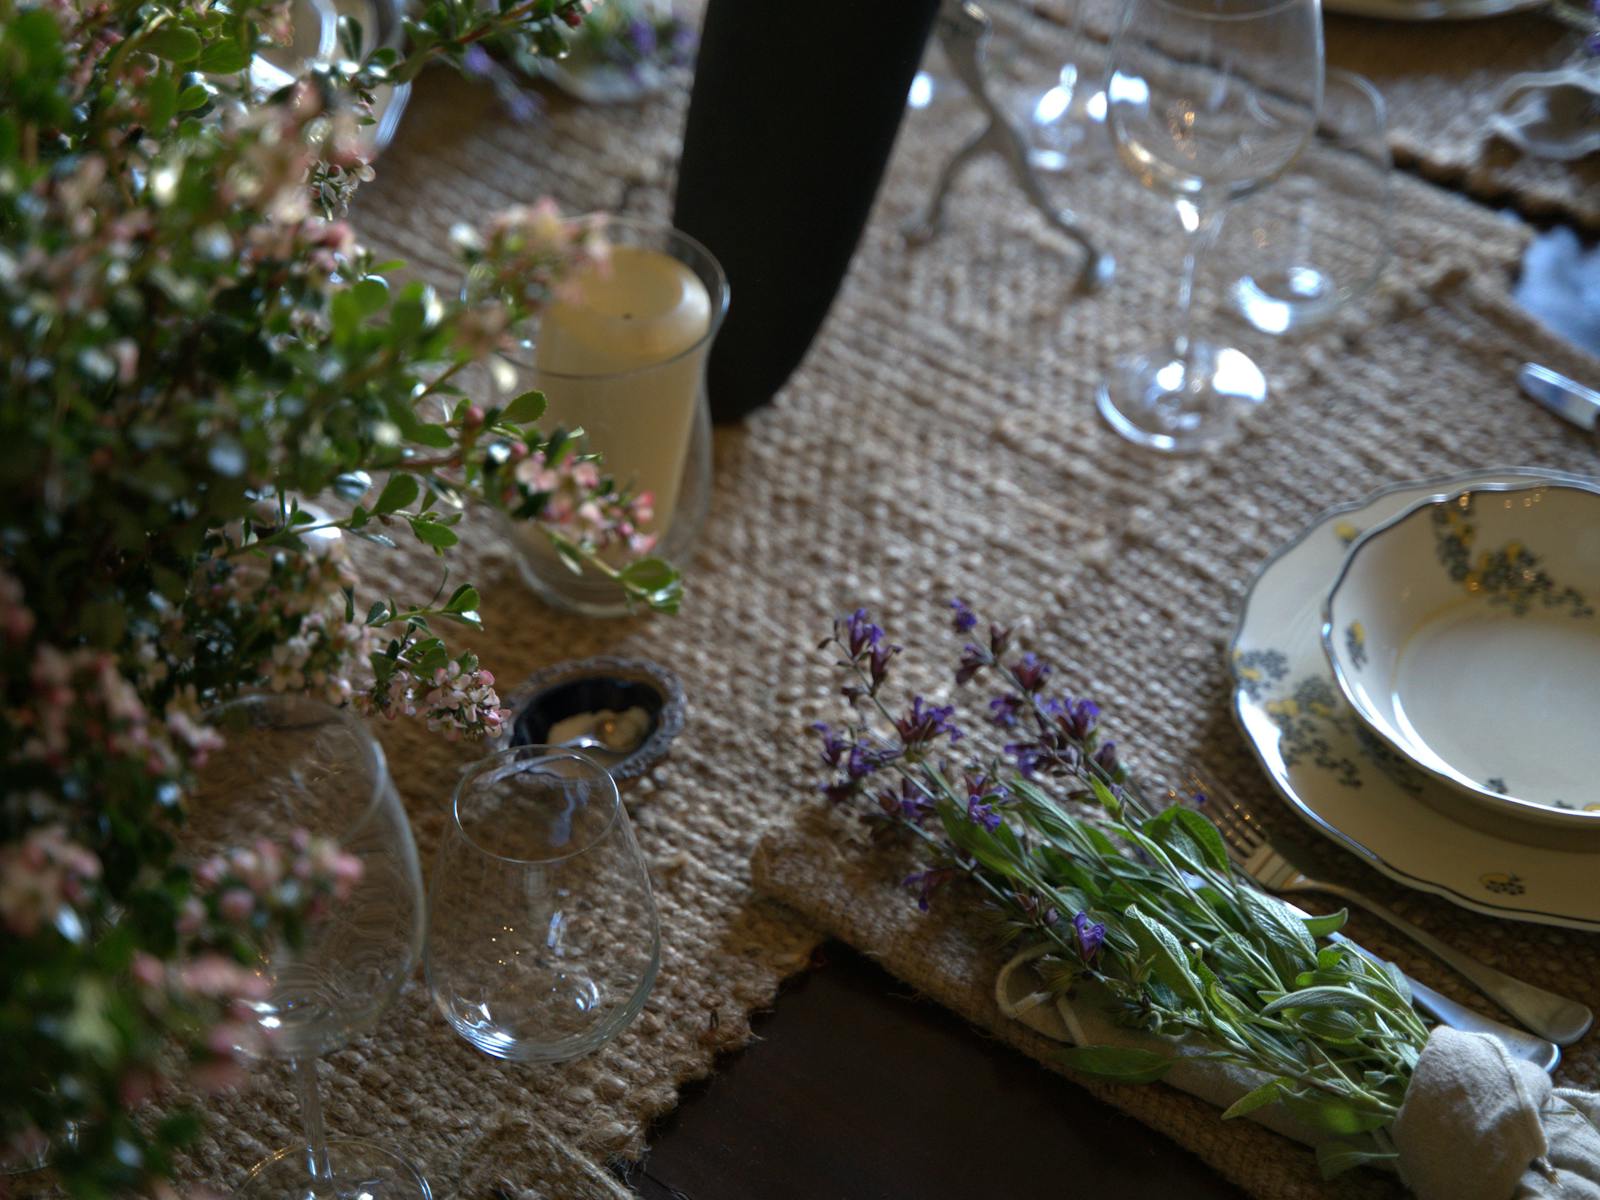 Vintage china, glassware and fresh herbs for rustic stableslunch